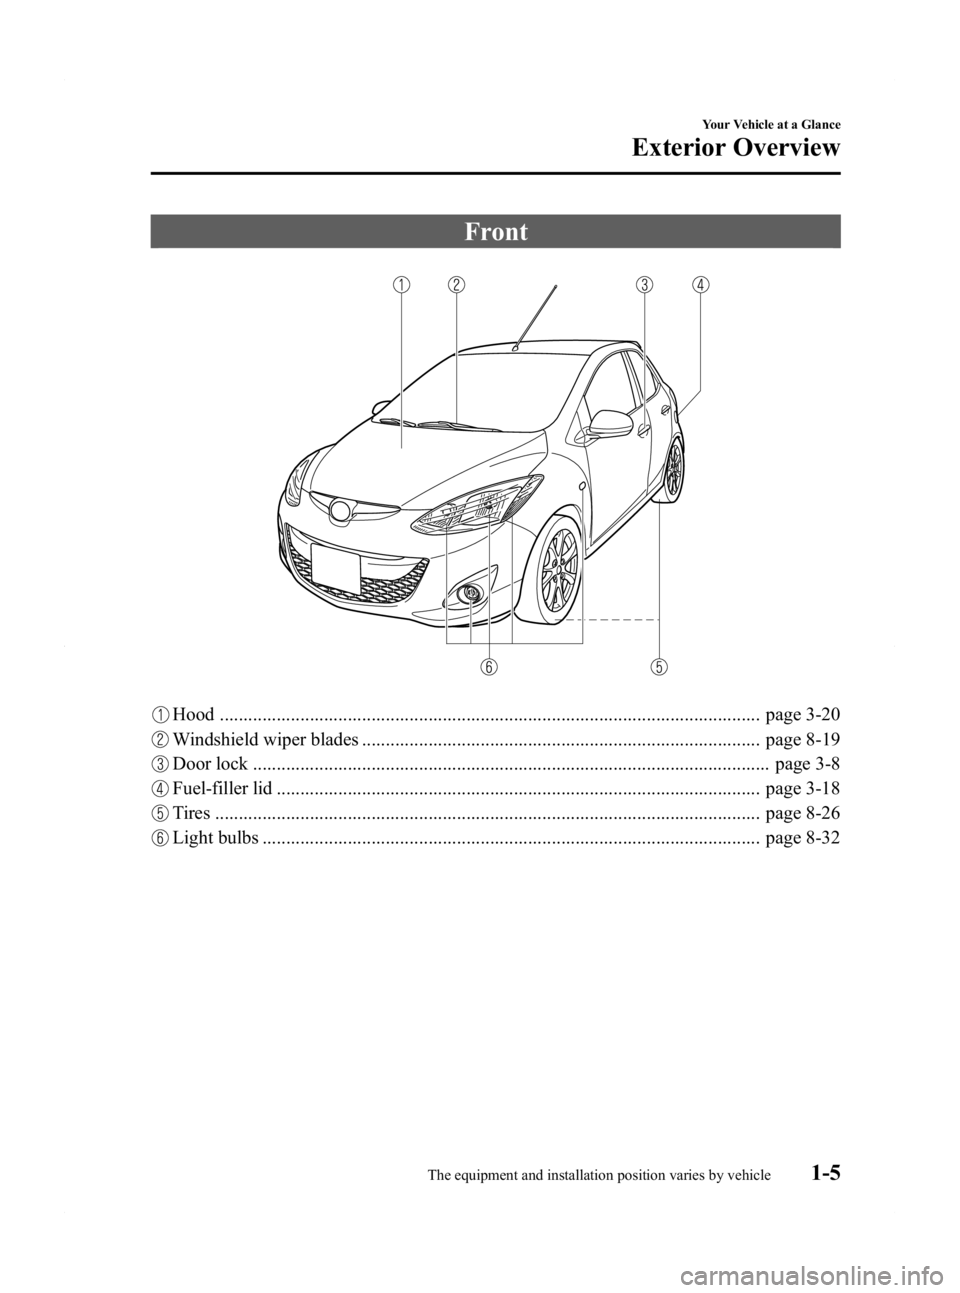 MAZDA MODEL 2 2011  Owners Manual Black plate (11,1)
Front
Hood .................................................................................................................. page 3-20
Windshield wiper blades .....................